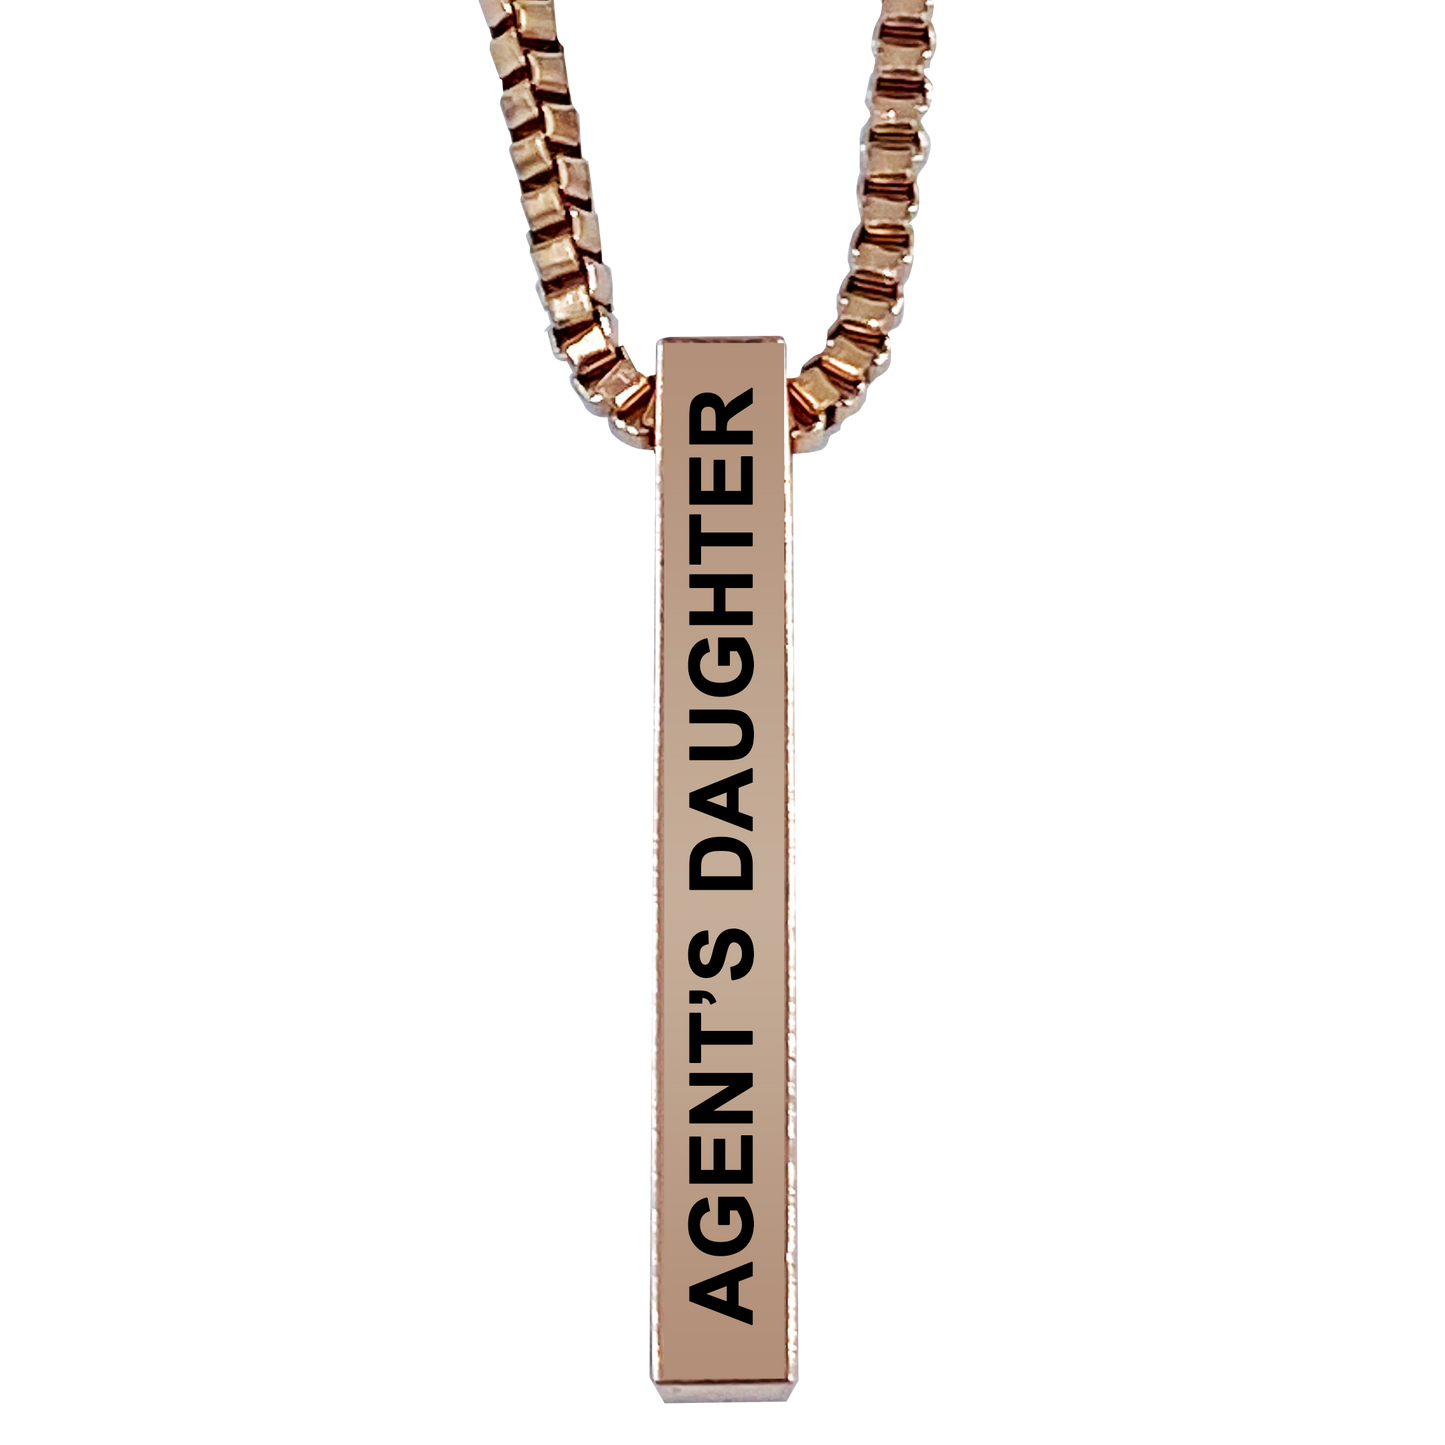 Agent's Daughter Rose Gold Plated Pillar Bar Pendant Necklace Gift Mother's Day Christmas Holiday Anniversary Police Sheriff Officer First Responder Law Enforcement